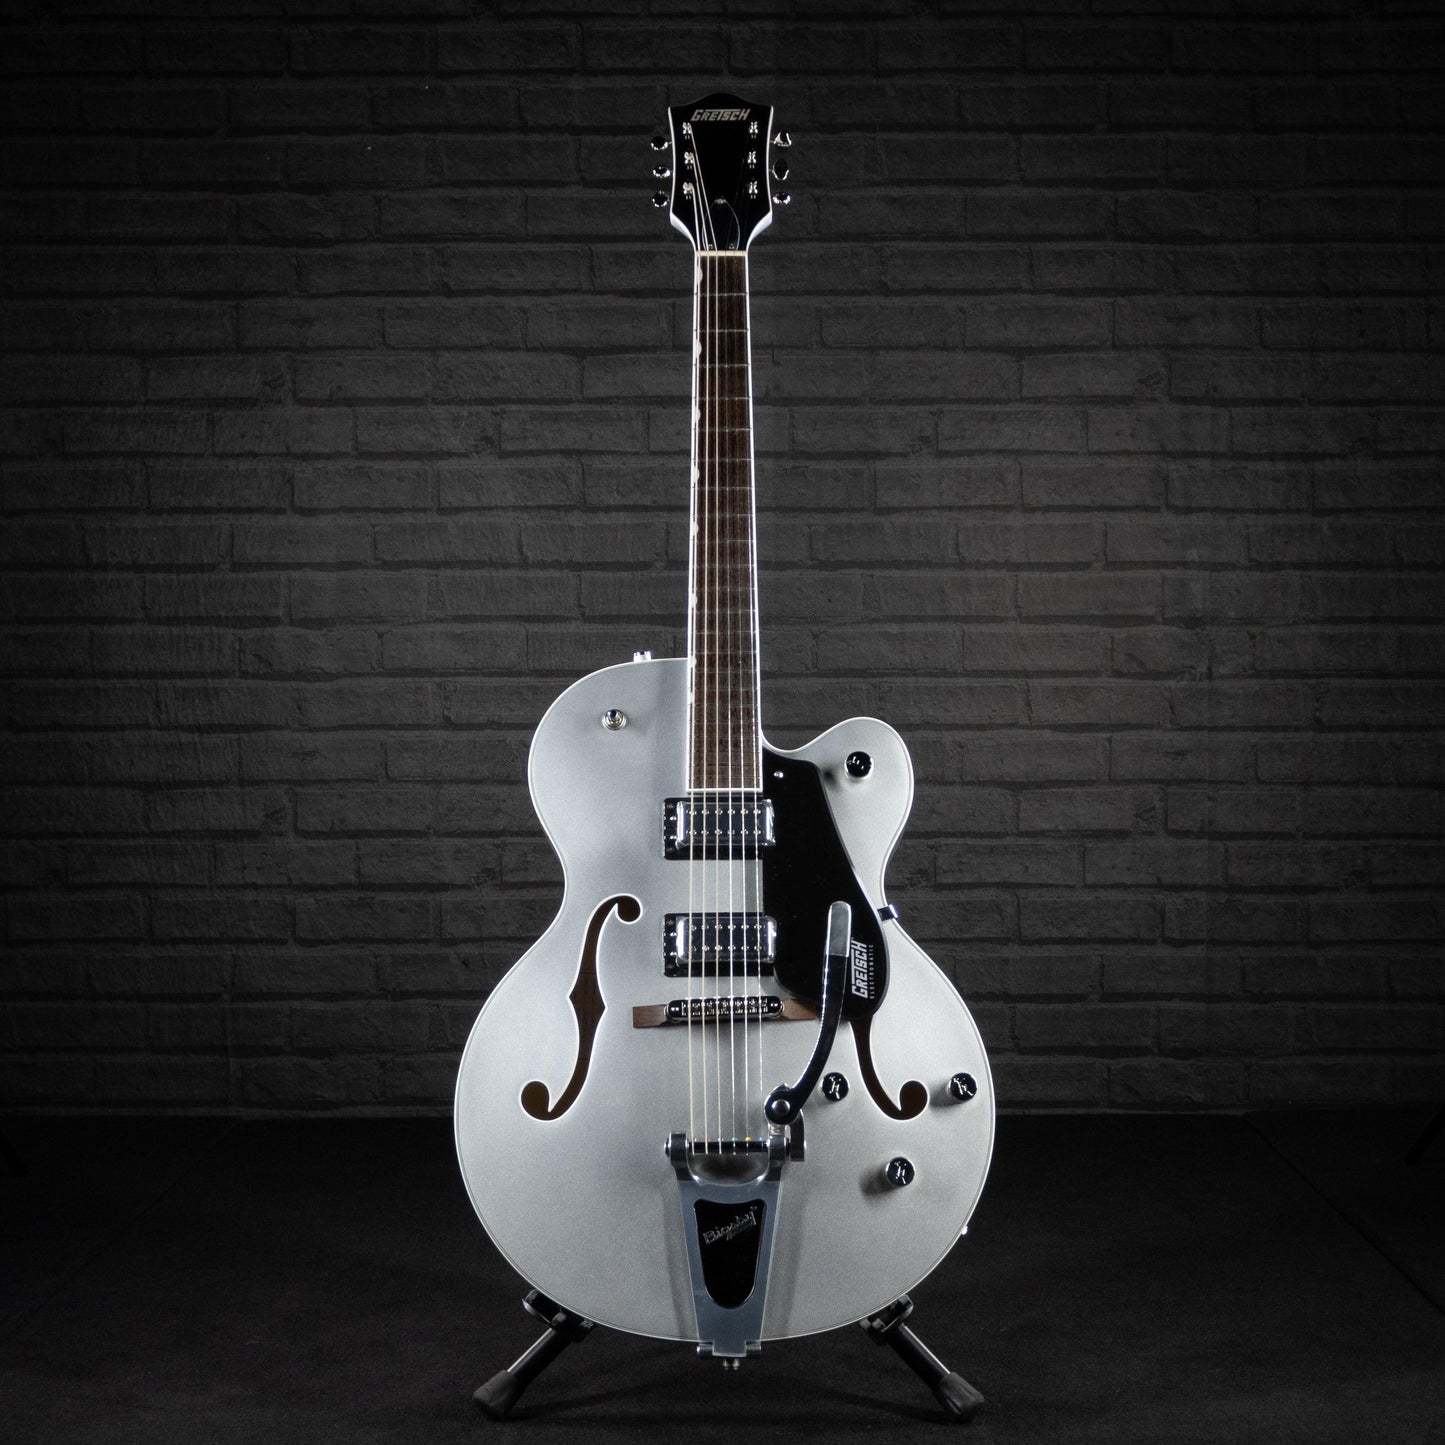 Gretsch G5420T Electromatic Classic Hollow Body Electric Guitar with Bigsby (Airline Silver) - Impulse Music Co.